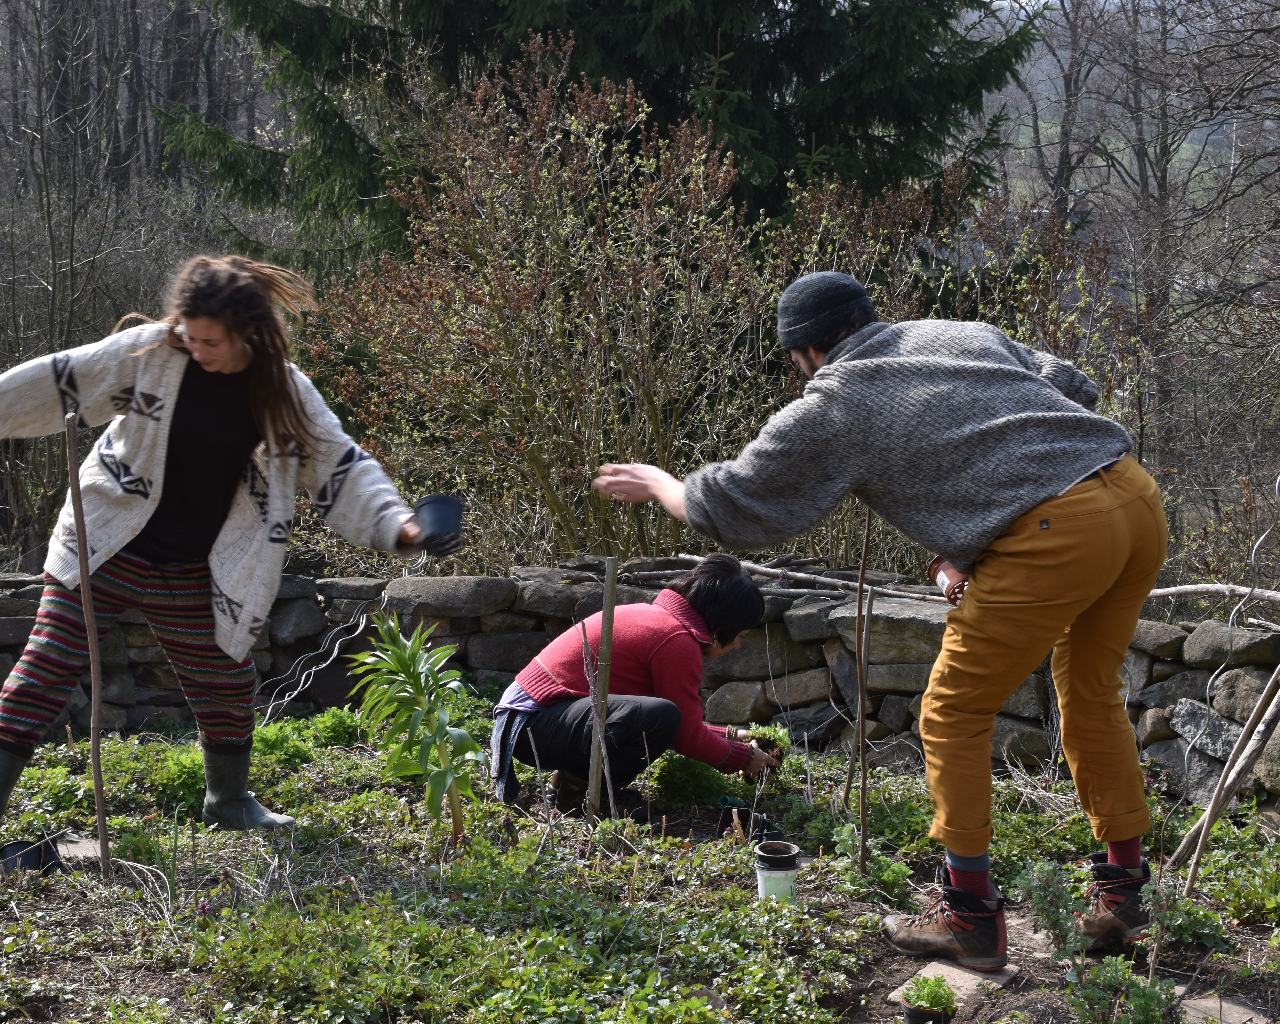 IPC 2019 - Introduction to permaculture in English - harvesting wild greens and practicing balance yoga at the same time in the kitchen garden